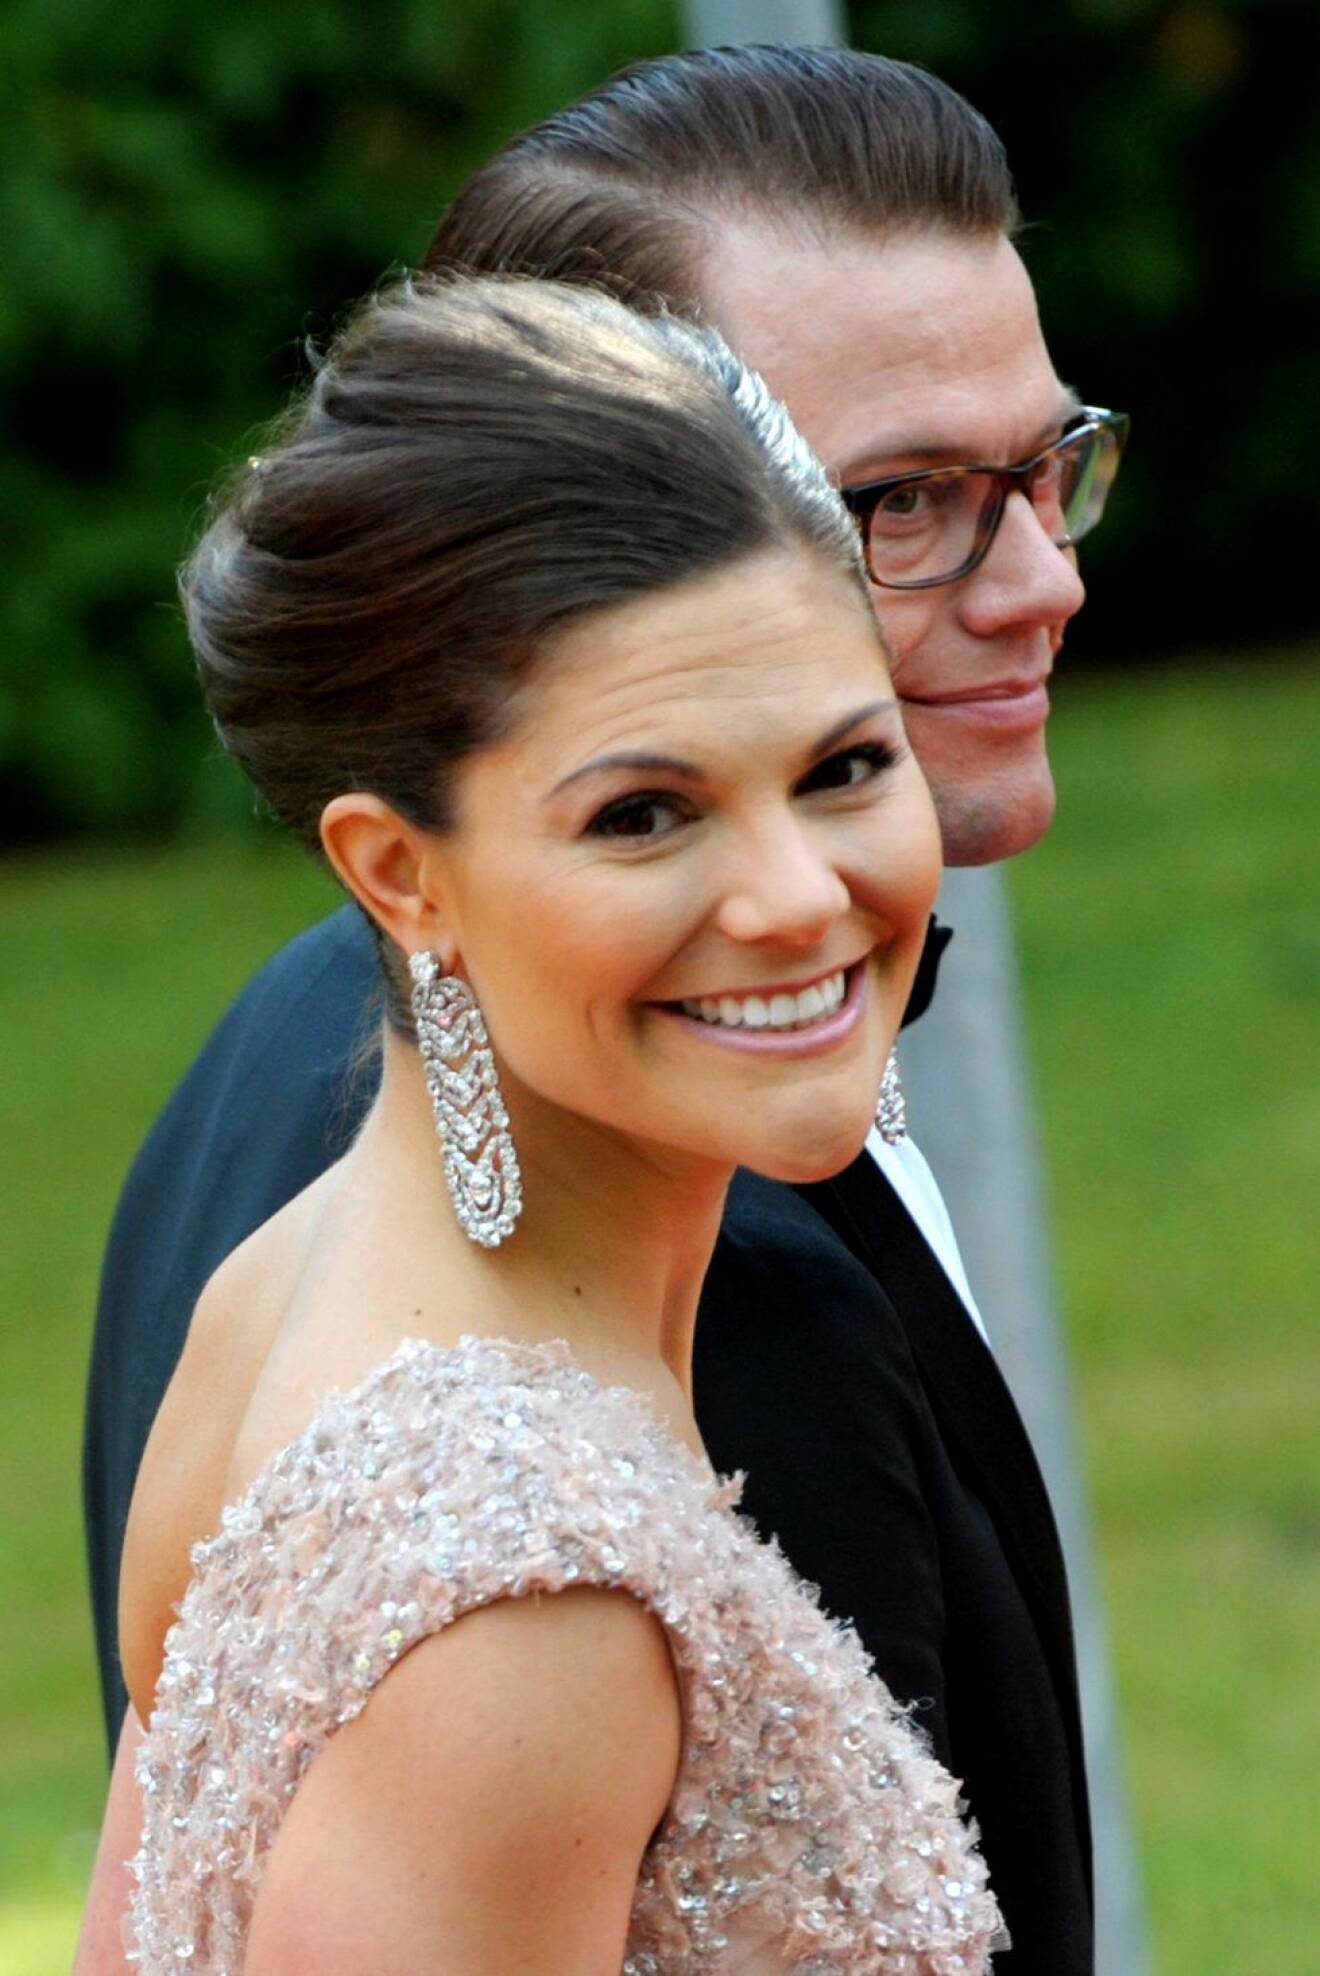 Crown Princess Victoria of Sweden (L) and her husband-to-be Daniel Westling (R) arrive at the goverment dinner held at the Eric Ericson Hall on Skeppsholmen, one of the islands of Stockholm, on the occasion of the wedding of Crown Princess Victoria of Sweden and Daniel Westling in Stockholm, Sweden, 18 June 2010. The royal wedding ceremony of Crown Princess Victoria of Sweden and Daniel Westling will take place on 19 June 2010. Photo: FRANK MAY (c) DPA / IBL Bildbyrå Regeringens middag Eric Ericson-hallen